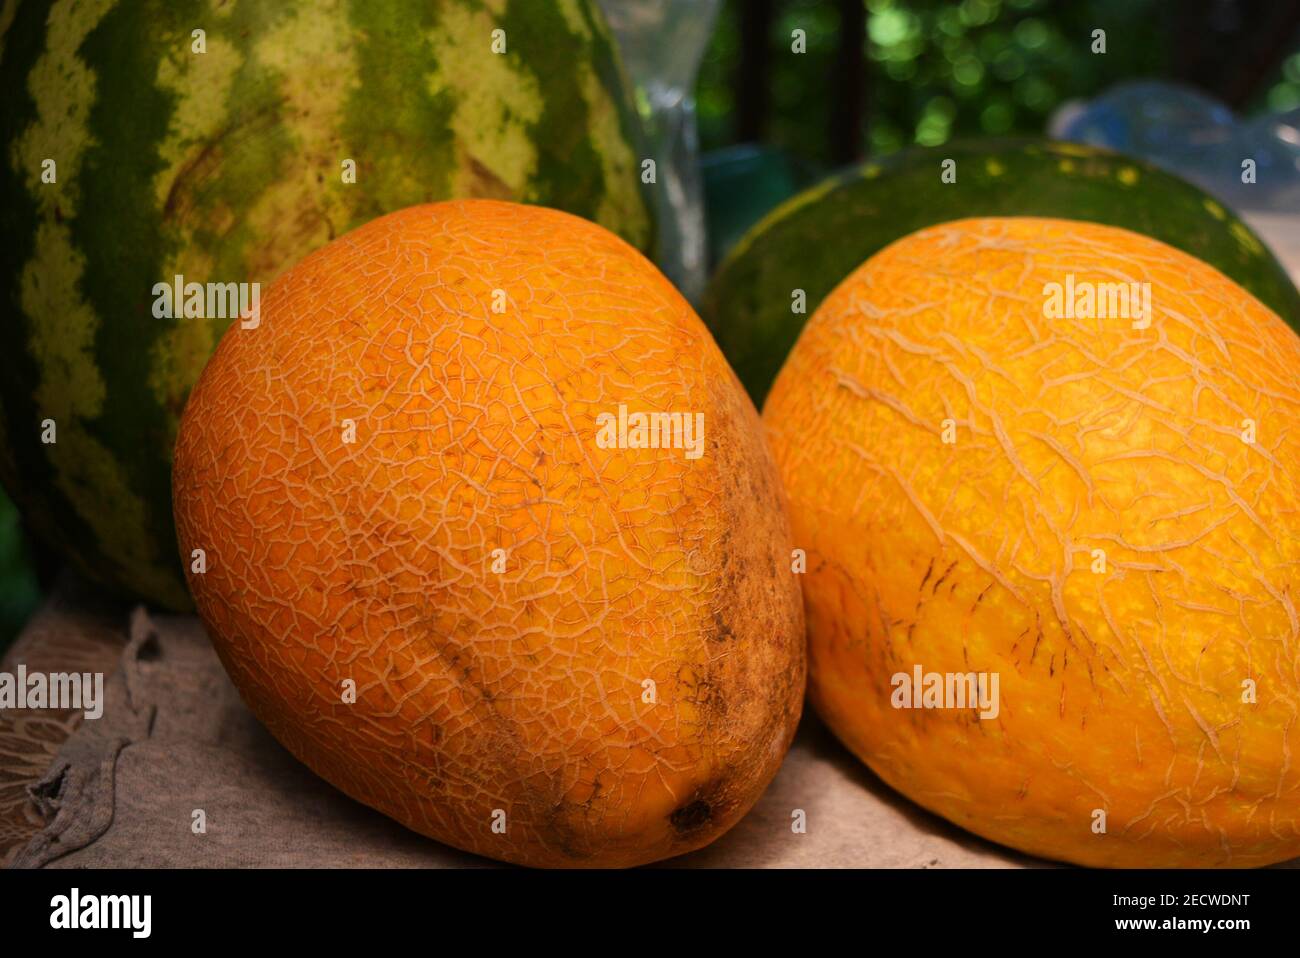 Juicy ripe two yellow melons and two green watermelons, fresh fruits, wholesome food. Stock Photo